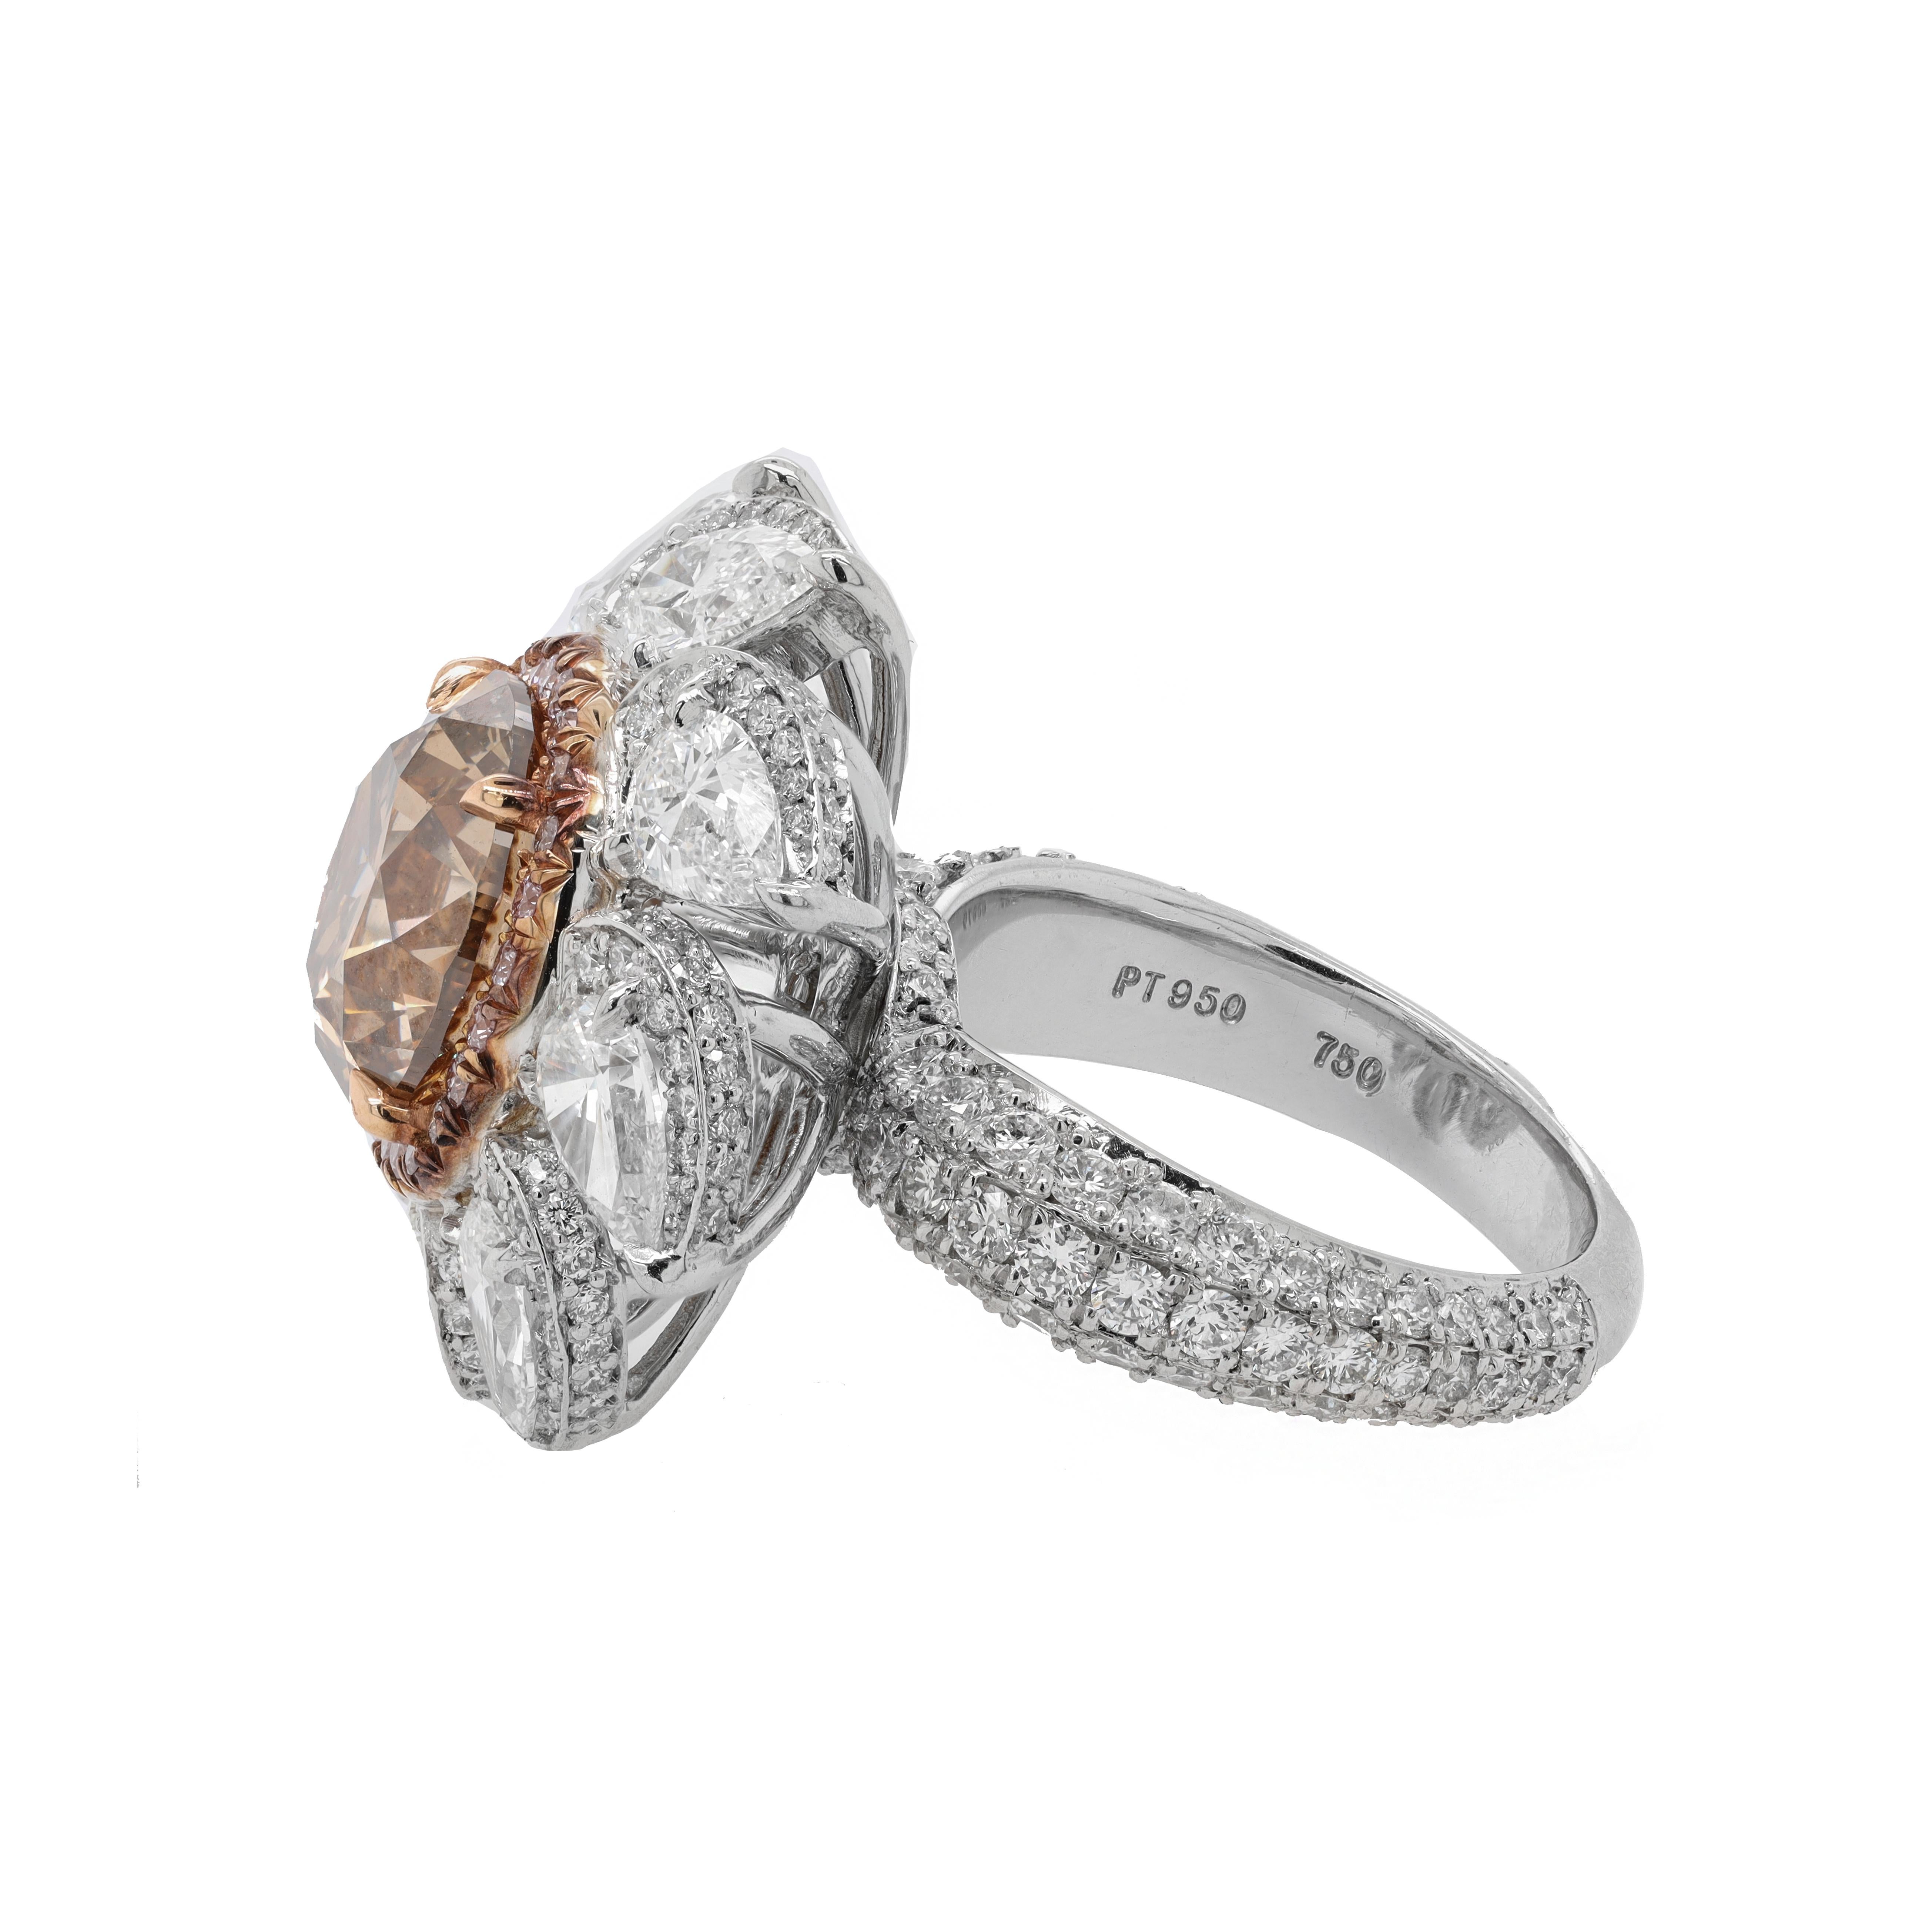 Platinum and 18kt yellow gold fancy diamond ring with center fancy brown 5.52ct (rdc4057) round shape set in a halo from pink diamonds and pear shapes in halos on the sides looks like a flower in micro pave diamond setting with 4.73cts of white